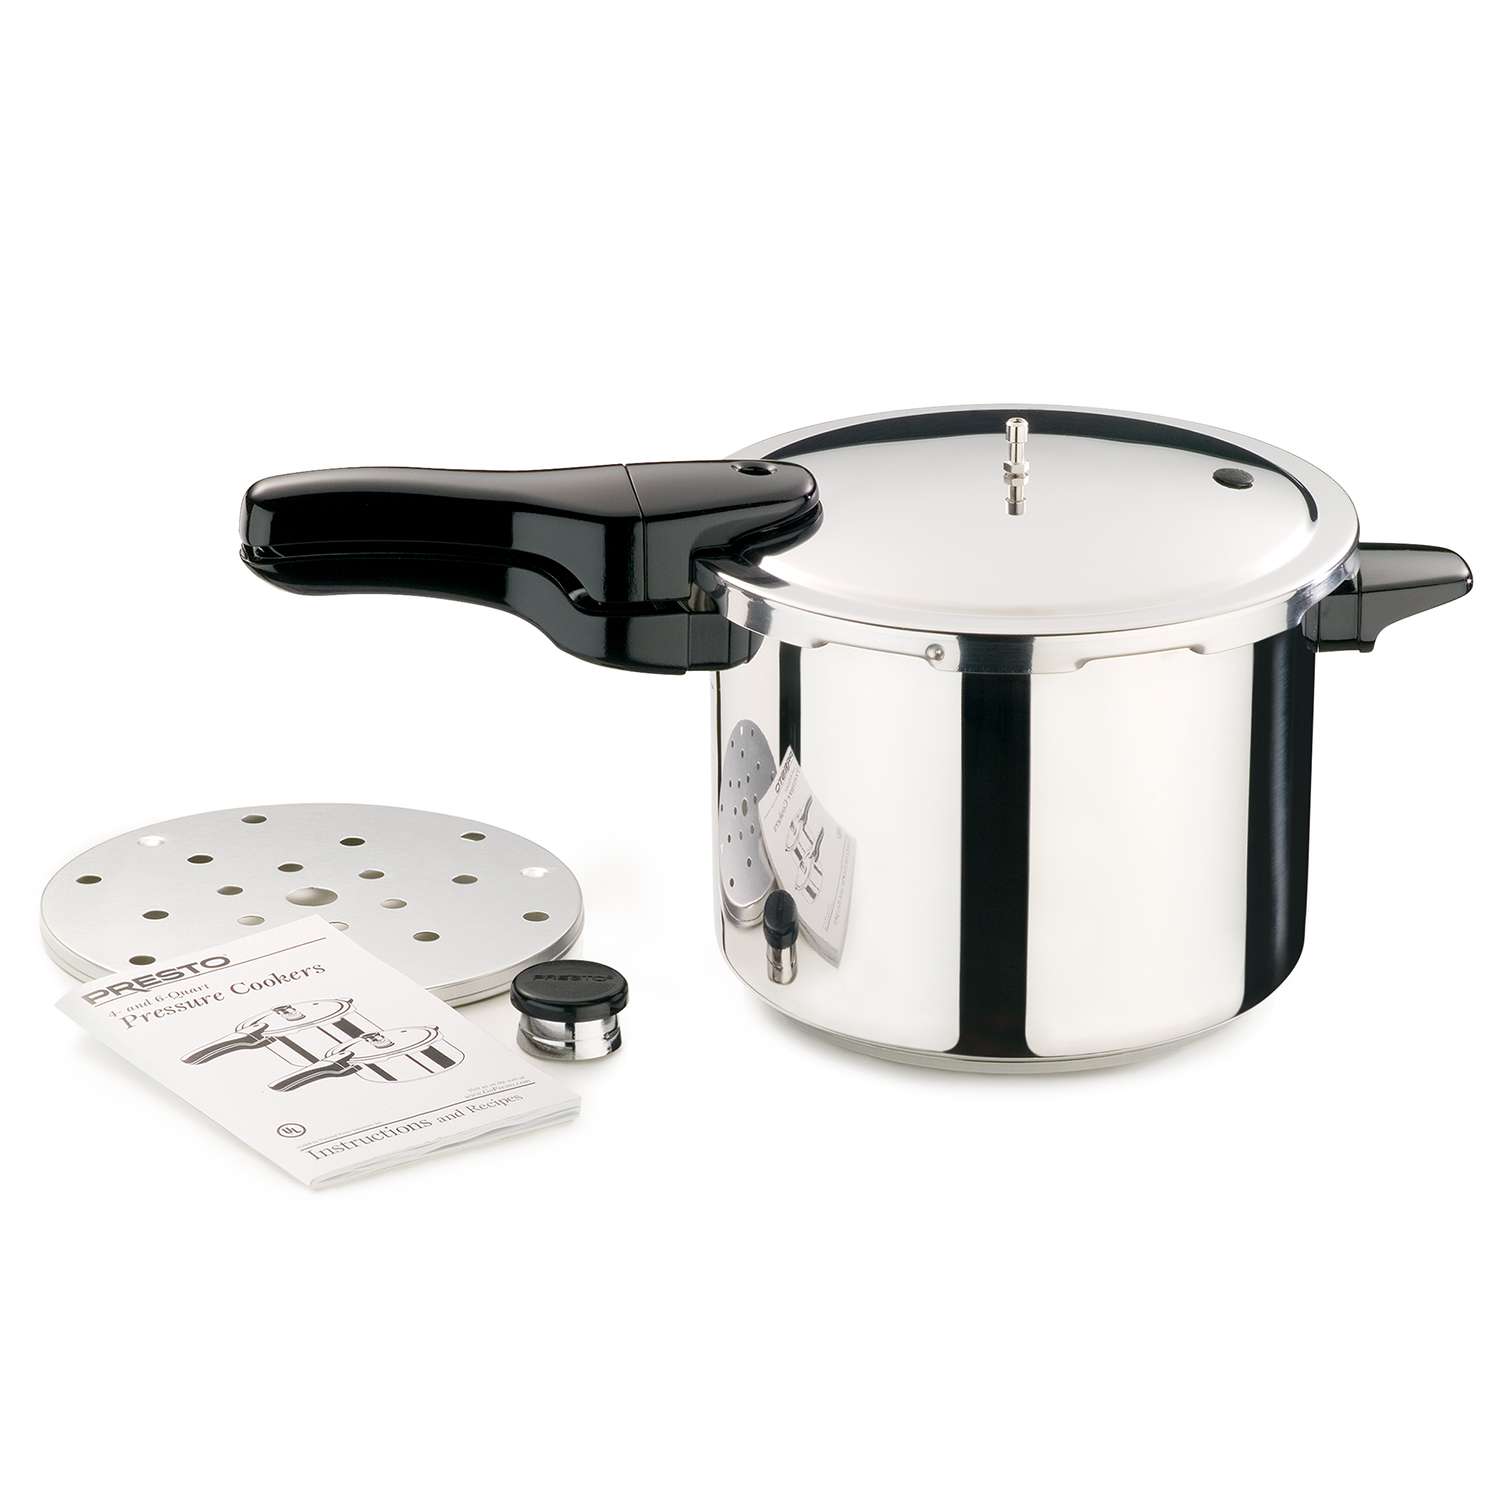 Crock-Pot 6-qt. Stainless Steel Express Easy Release Pressure